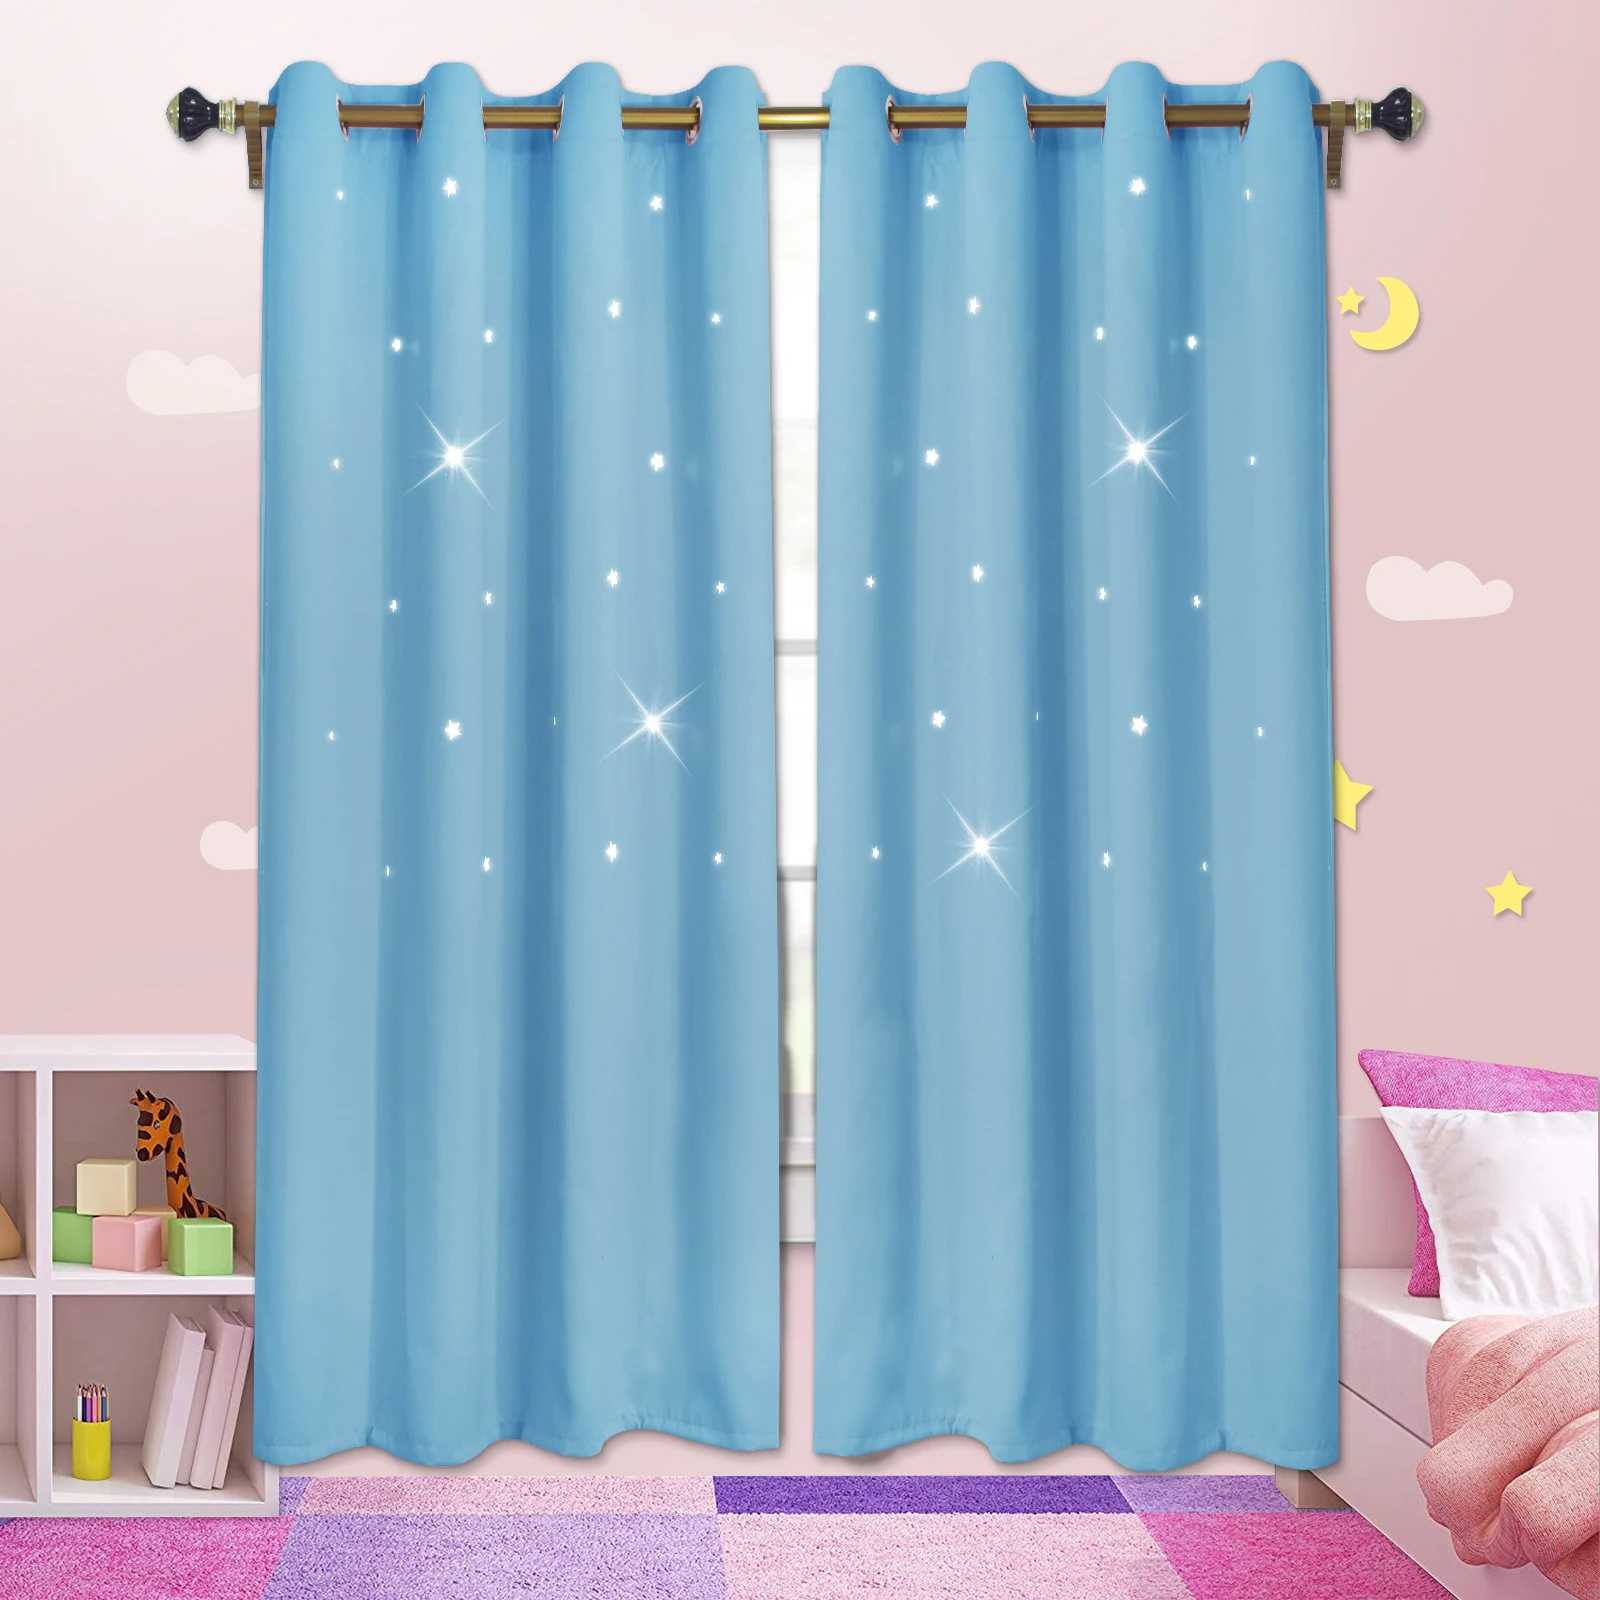 

Shiny Star Curtains For Kid Bedroom Blackout Window Curtain Glow in The Dark Drapes Eyelet Panel Hollow-Out Stars Blind Decor